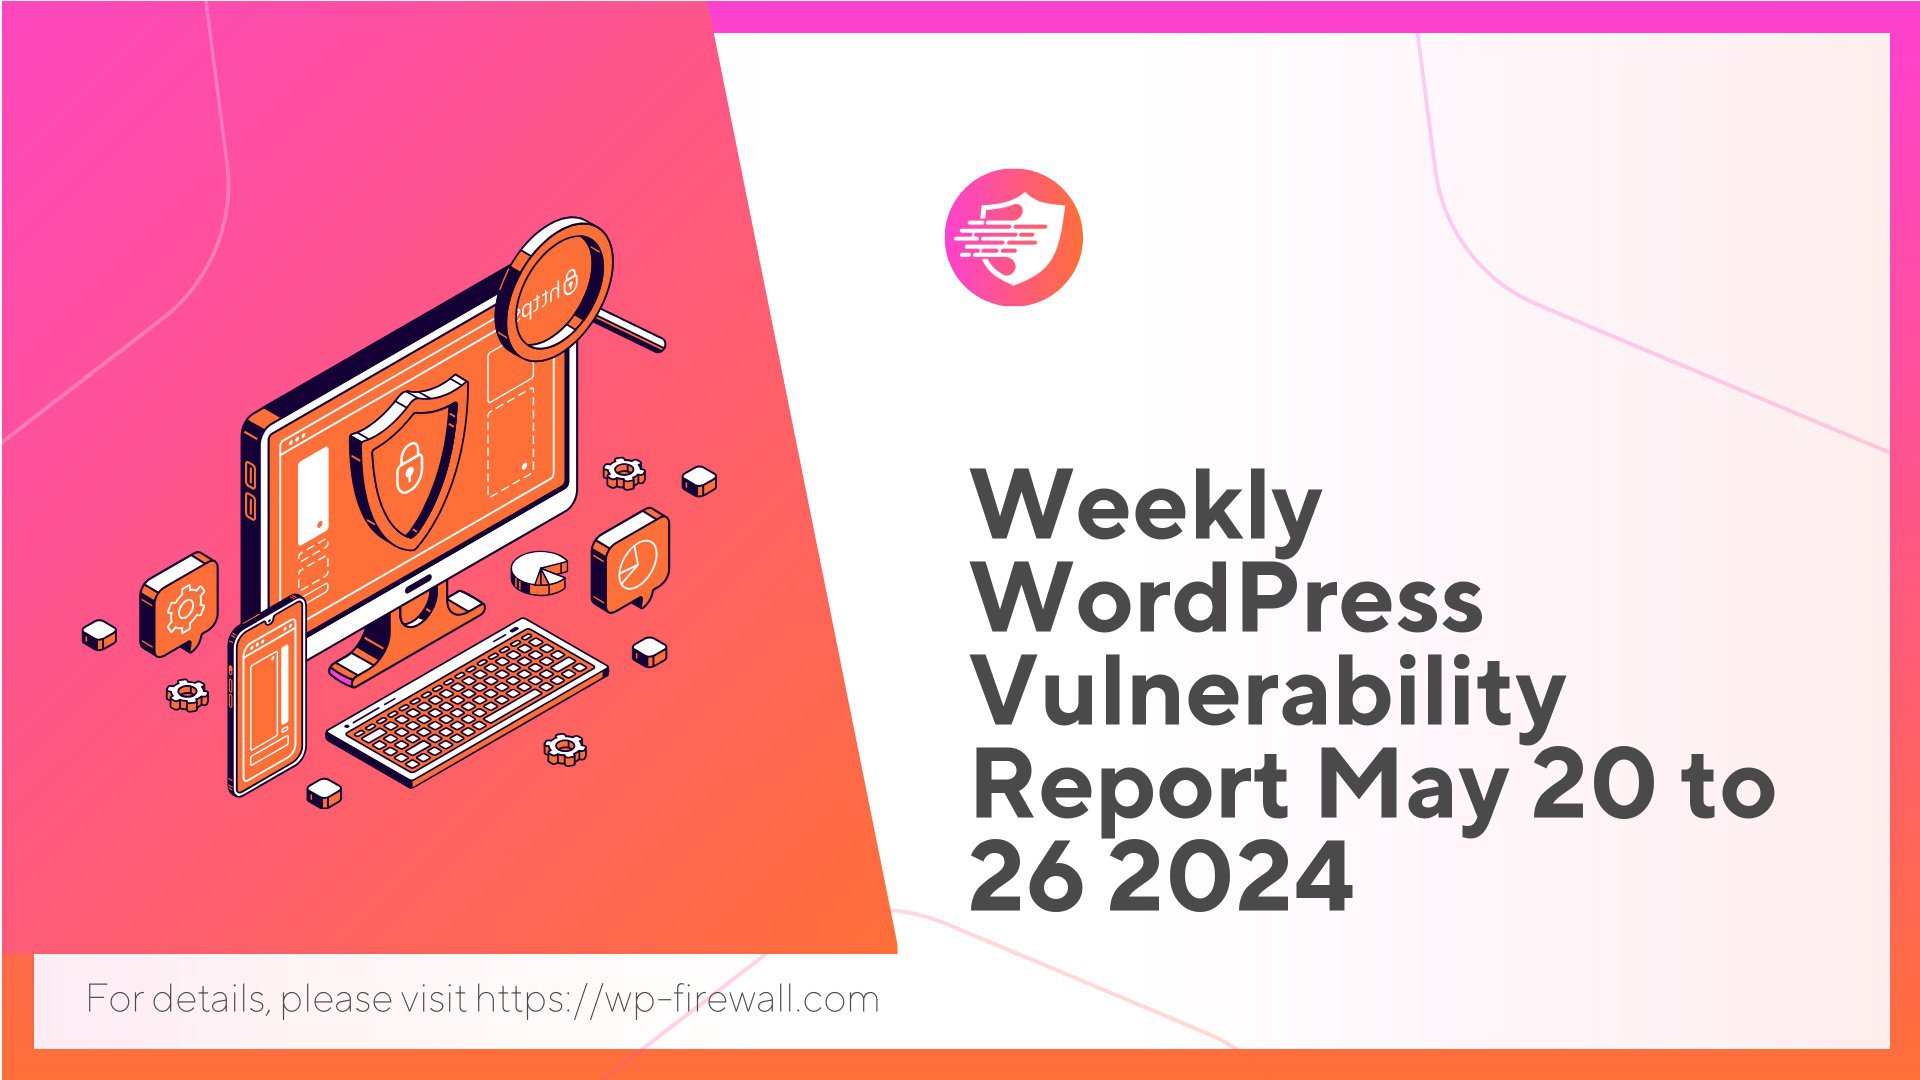 Weekly WordPress Vulnerability Report May 20 to 26 2024 cover